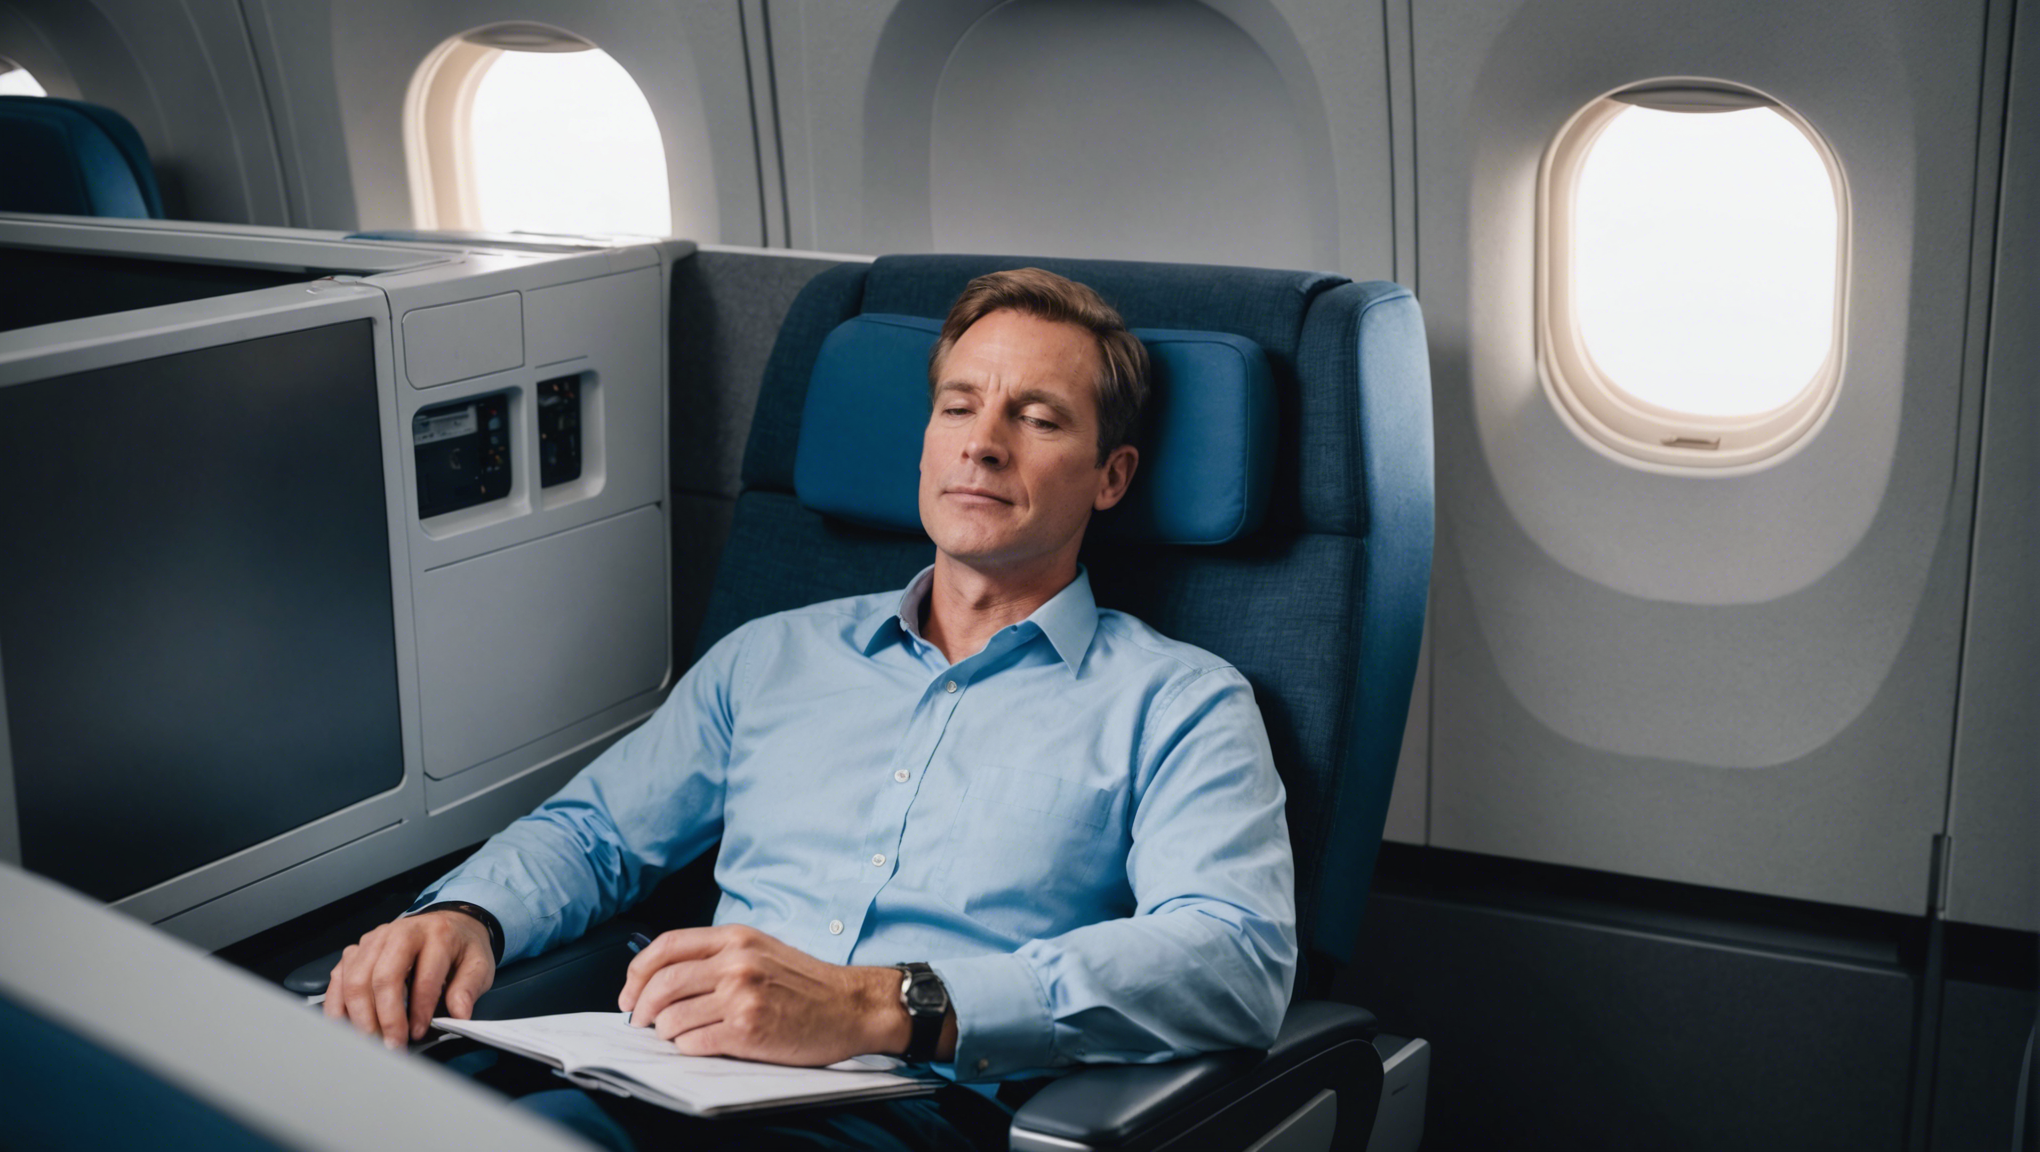 discover how to rest and sleep well during a flight with our practical advice for a worry-free trip.